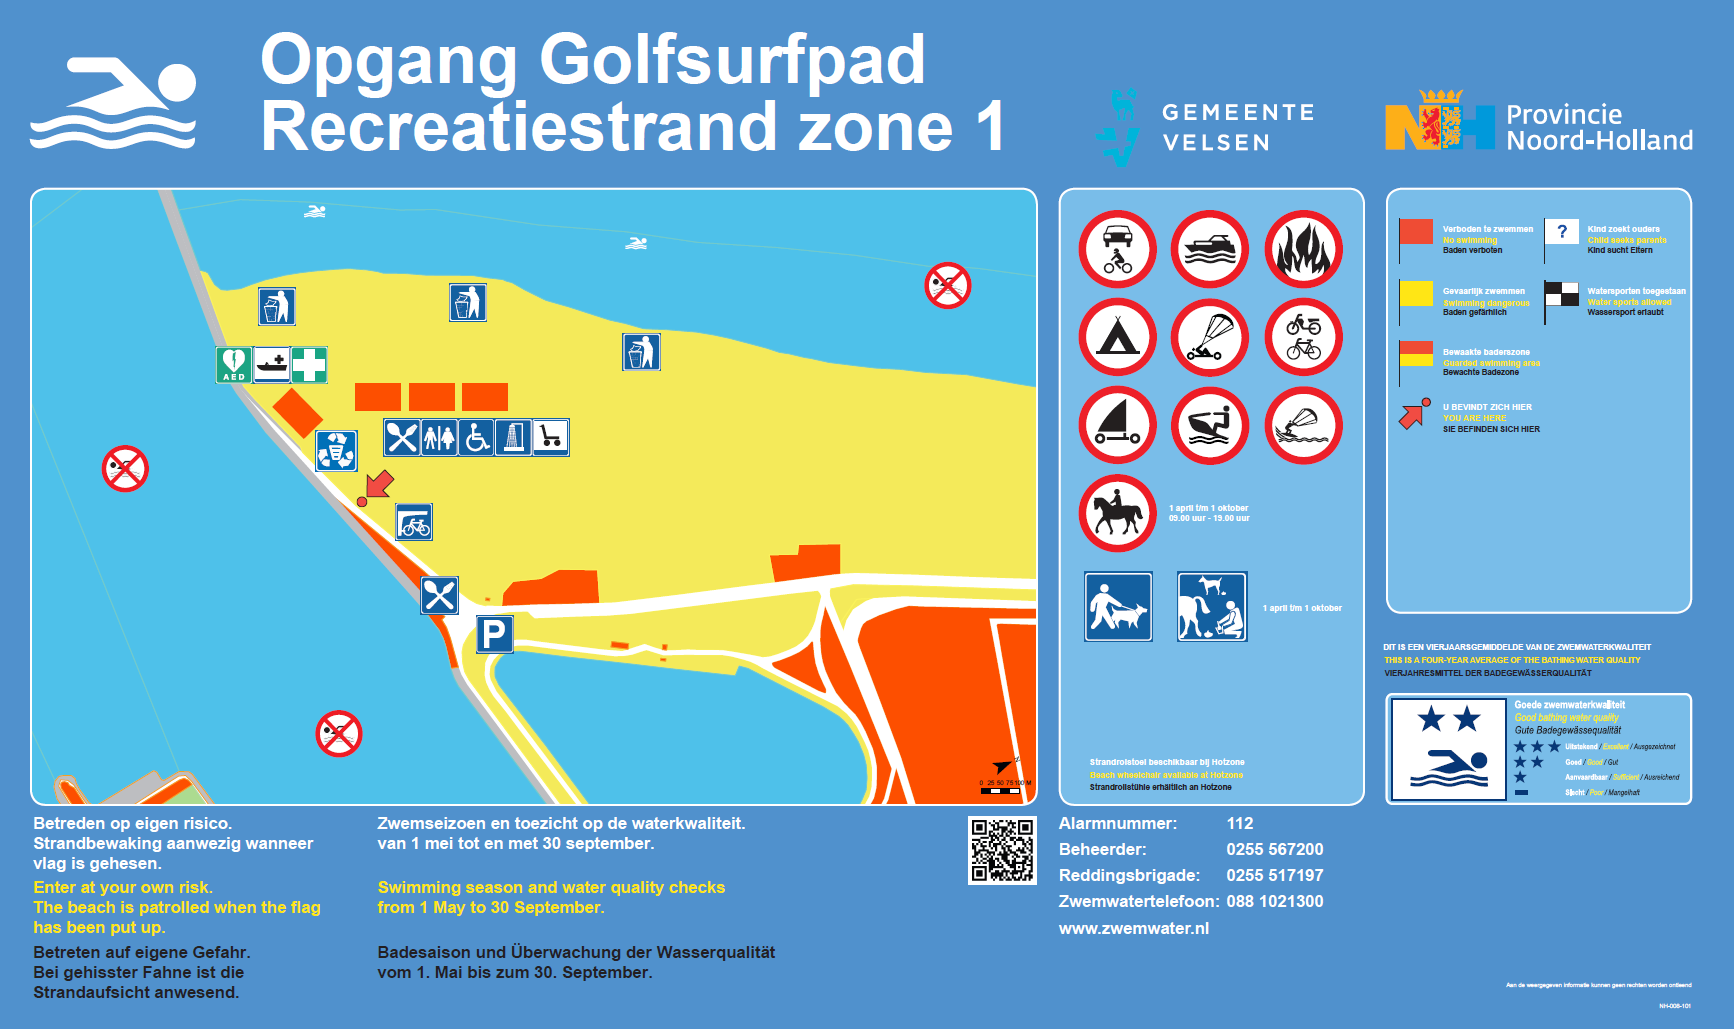 The information board at the swimming location Strand Noordpier, Zone 1, Velsen